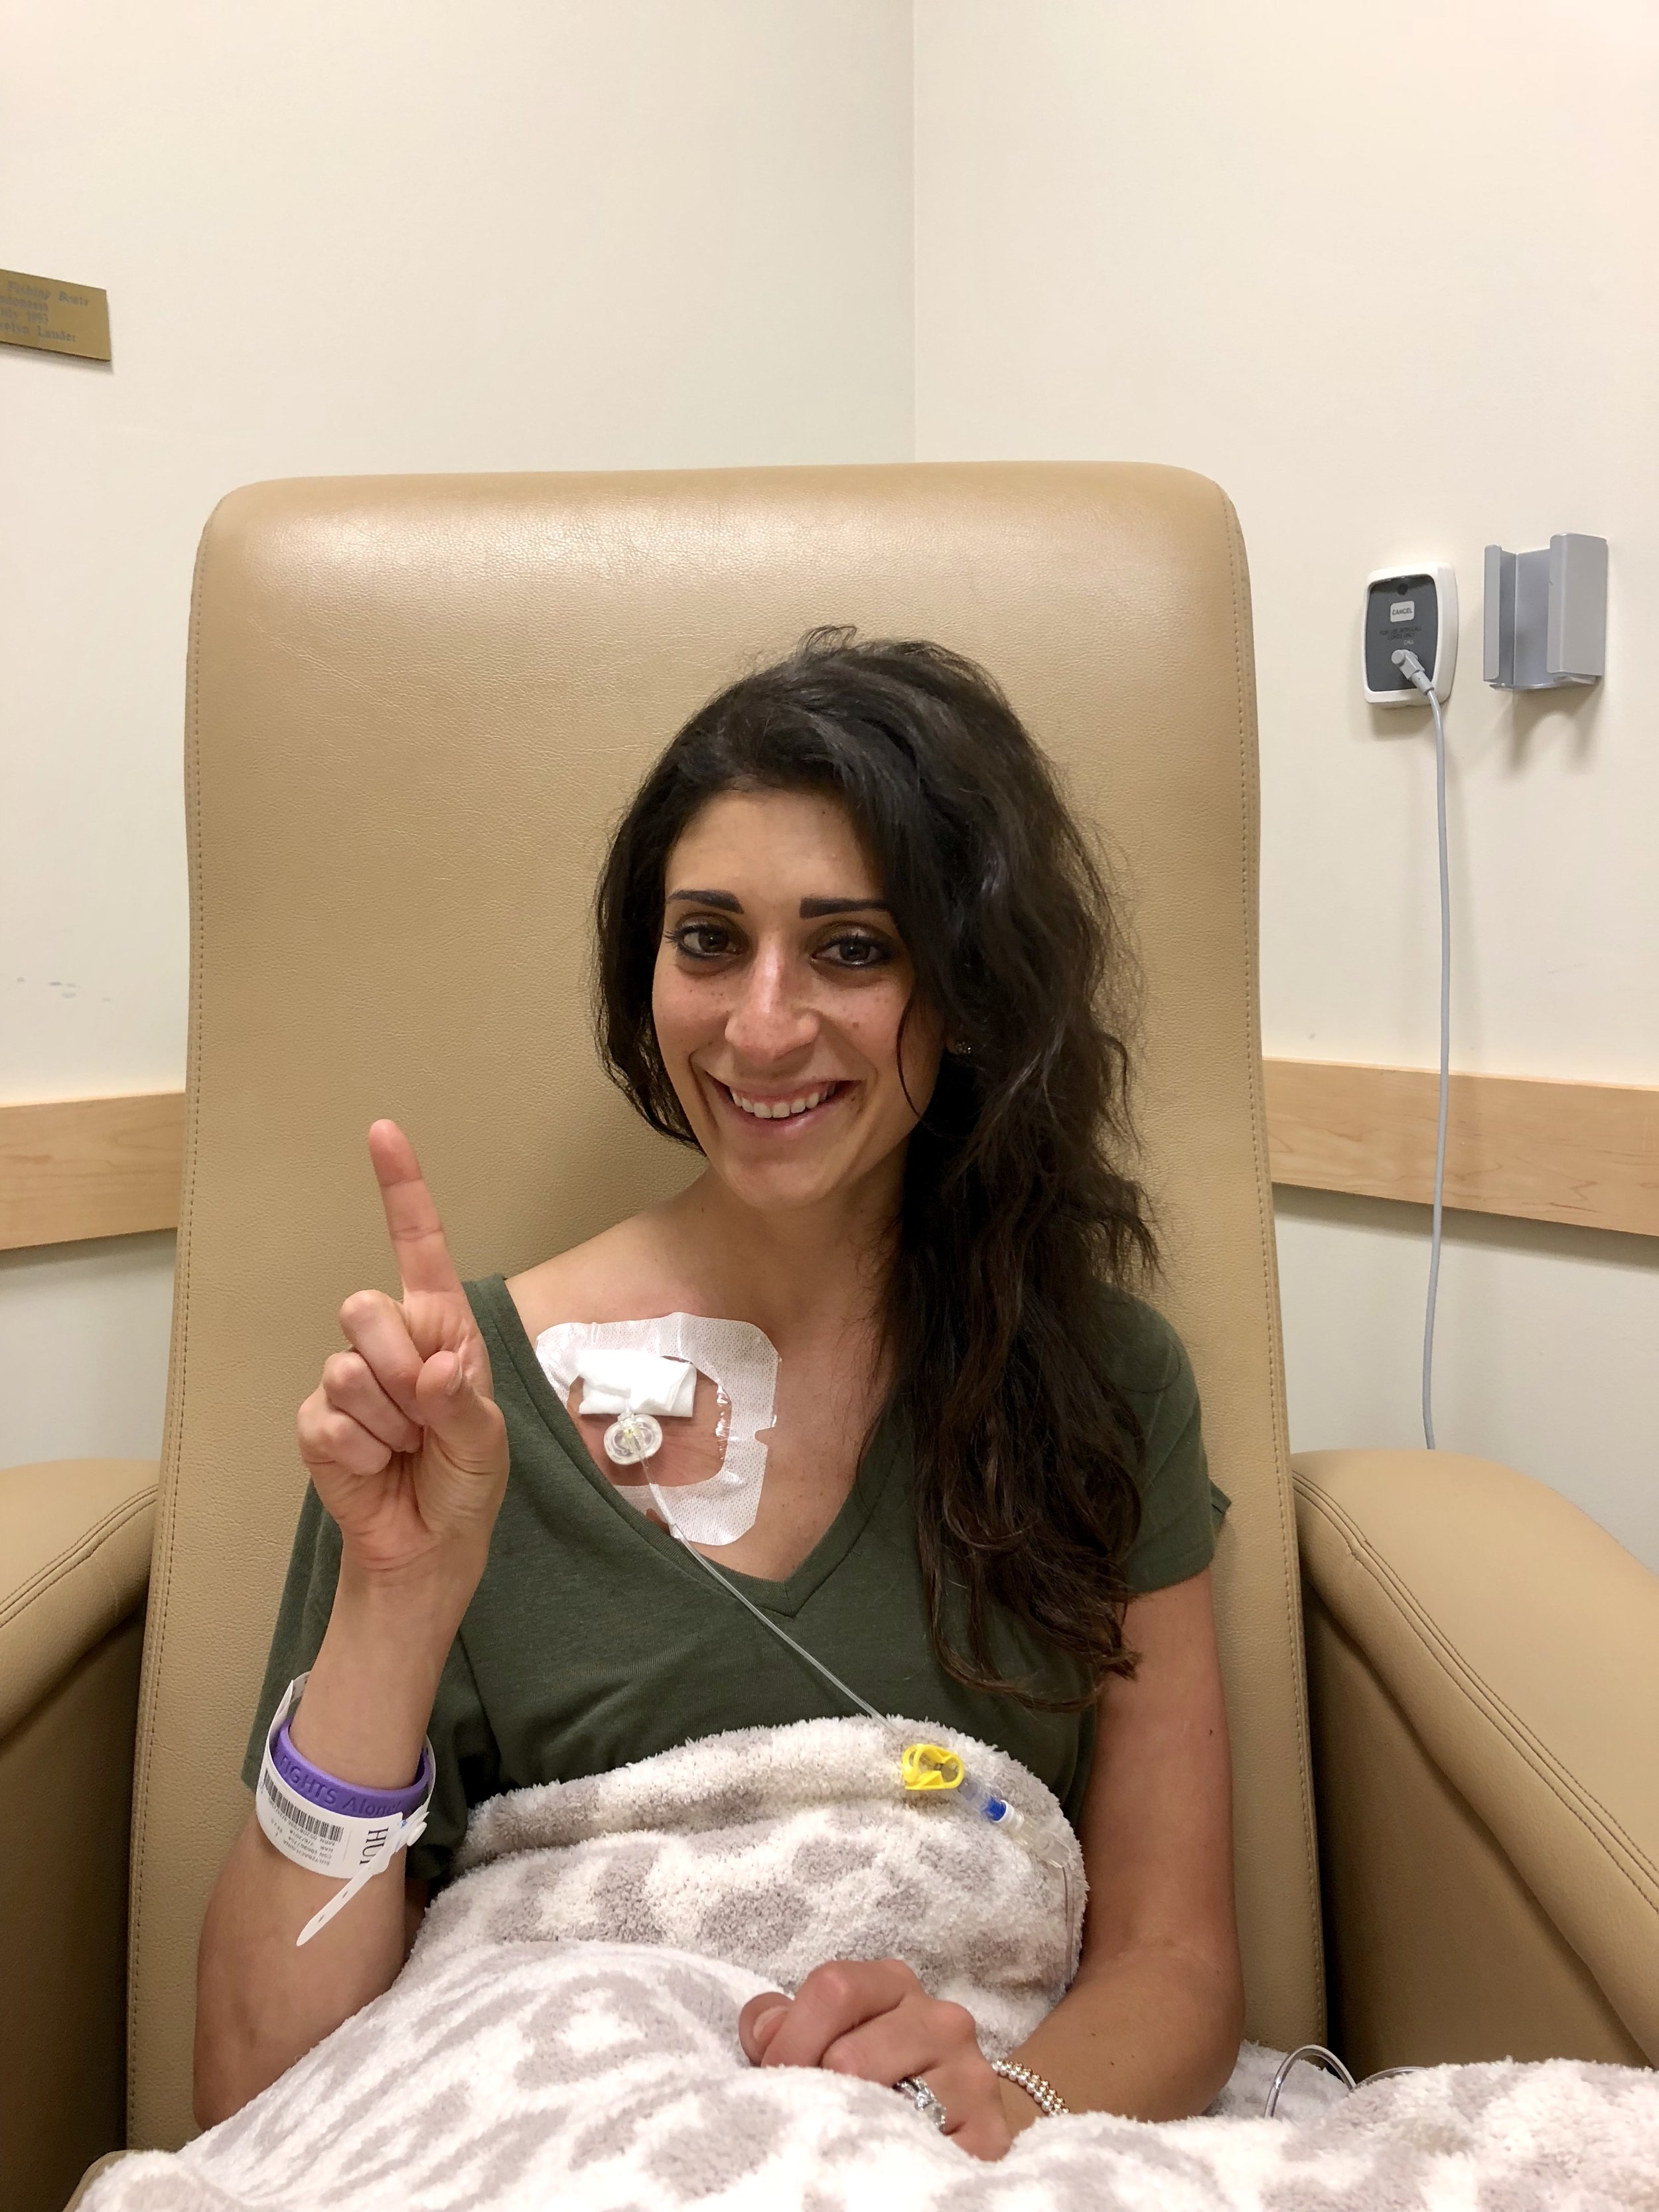 port placement and chemo #1 — gina sultz